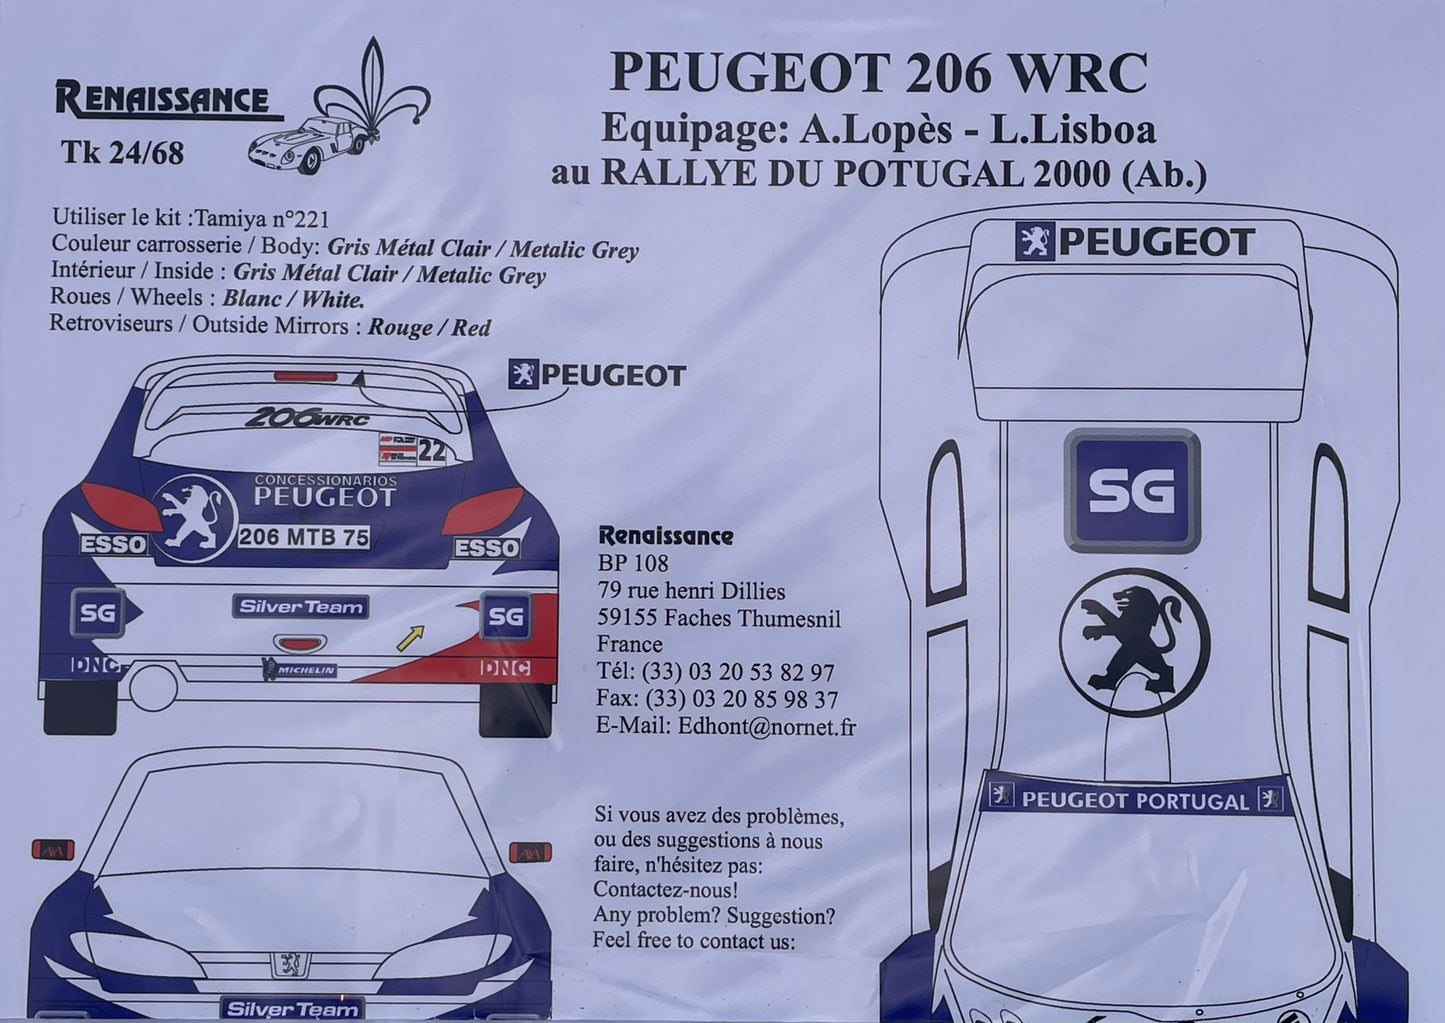 DECALS PEUGEOT 206 WRC SILVER TEAM - RALLY PORTUGAL 2000 - ADRUZILO LOPES